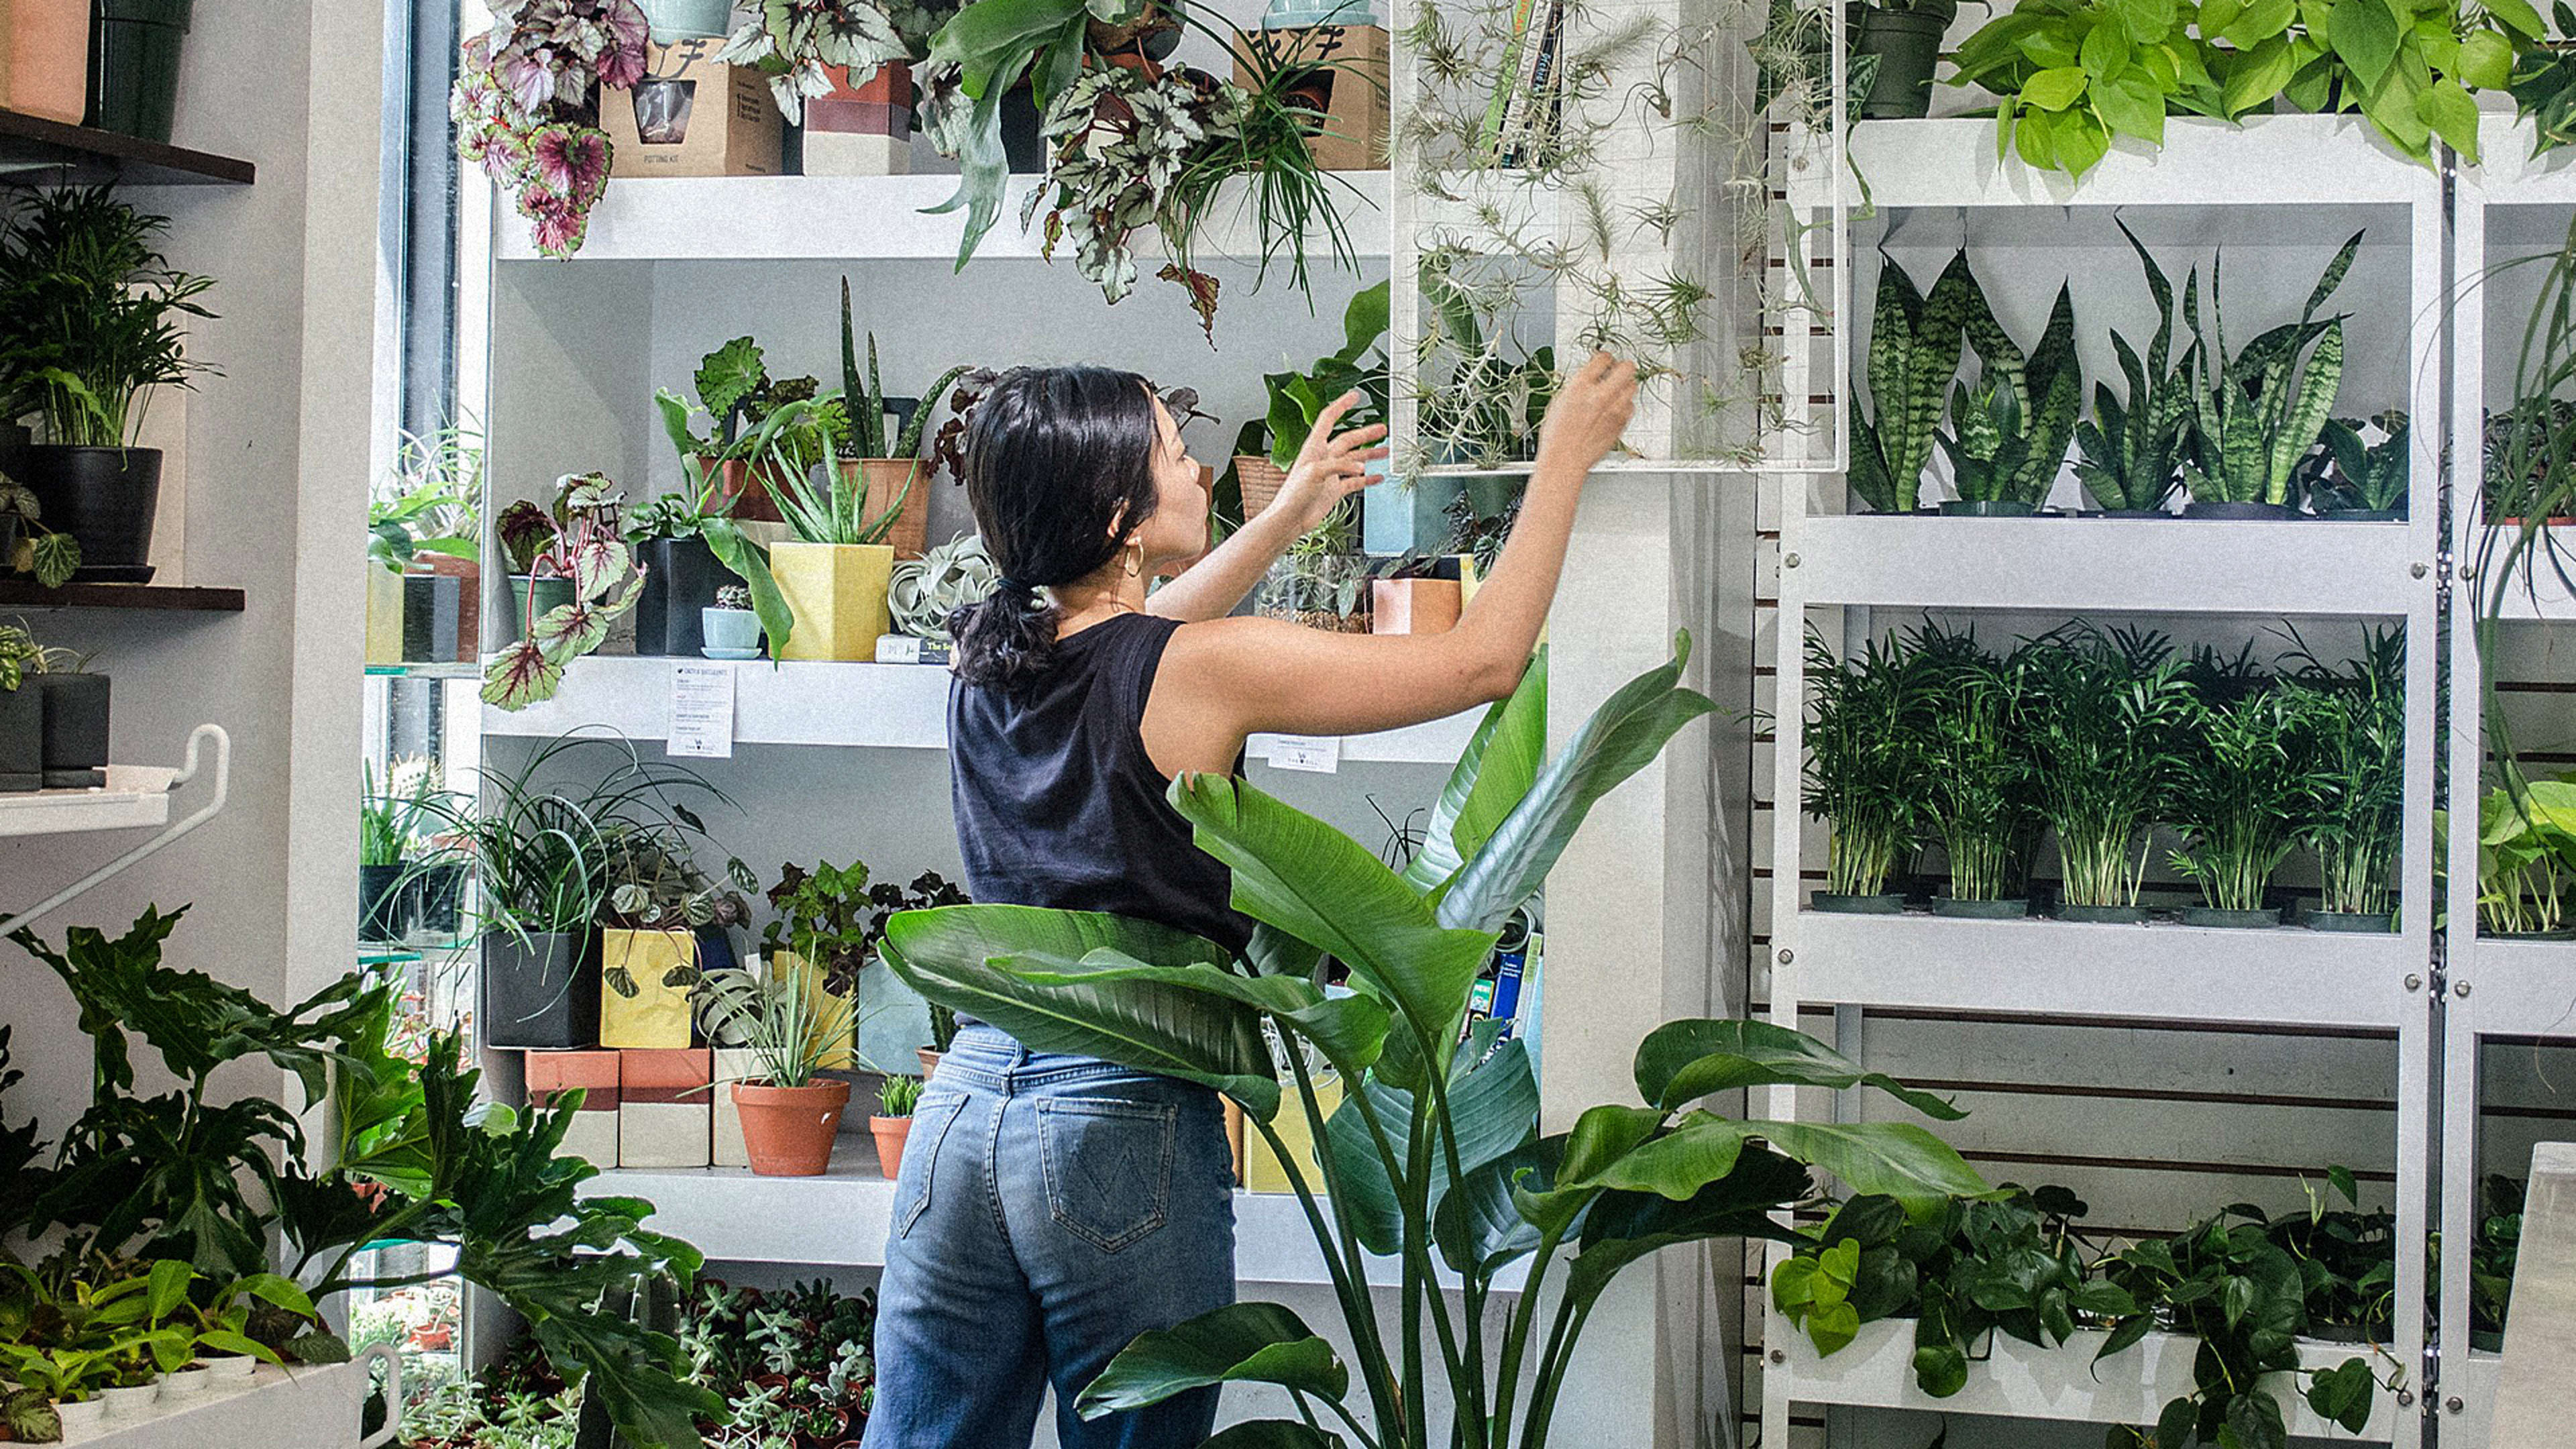 The hottest new wellness startups are selling houseplants